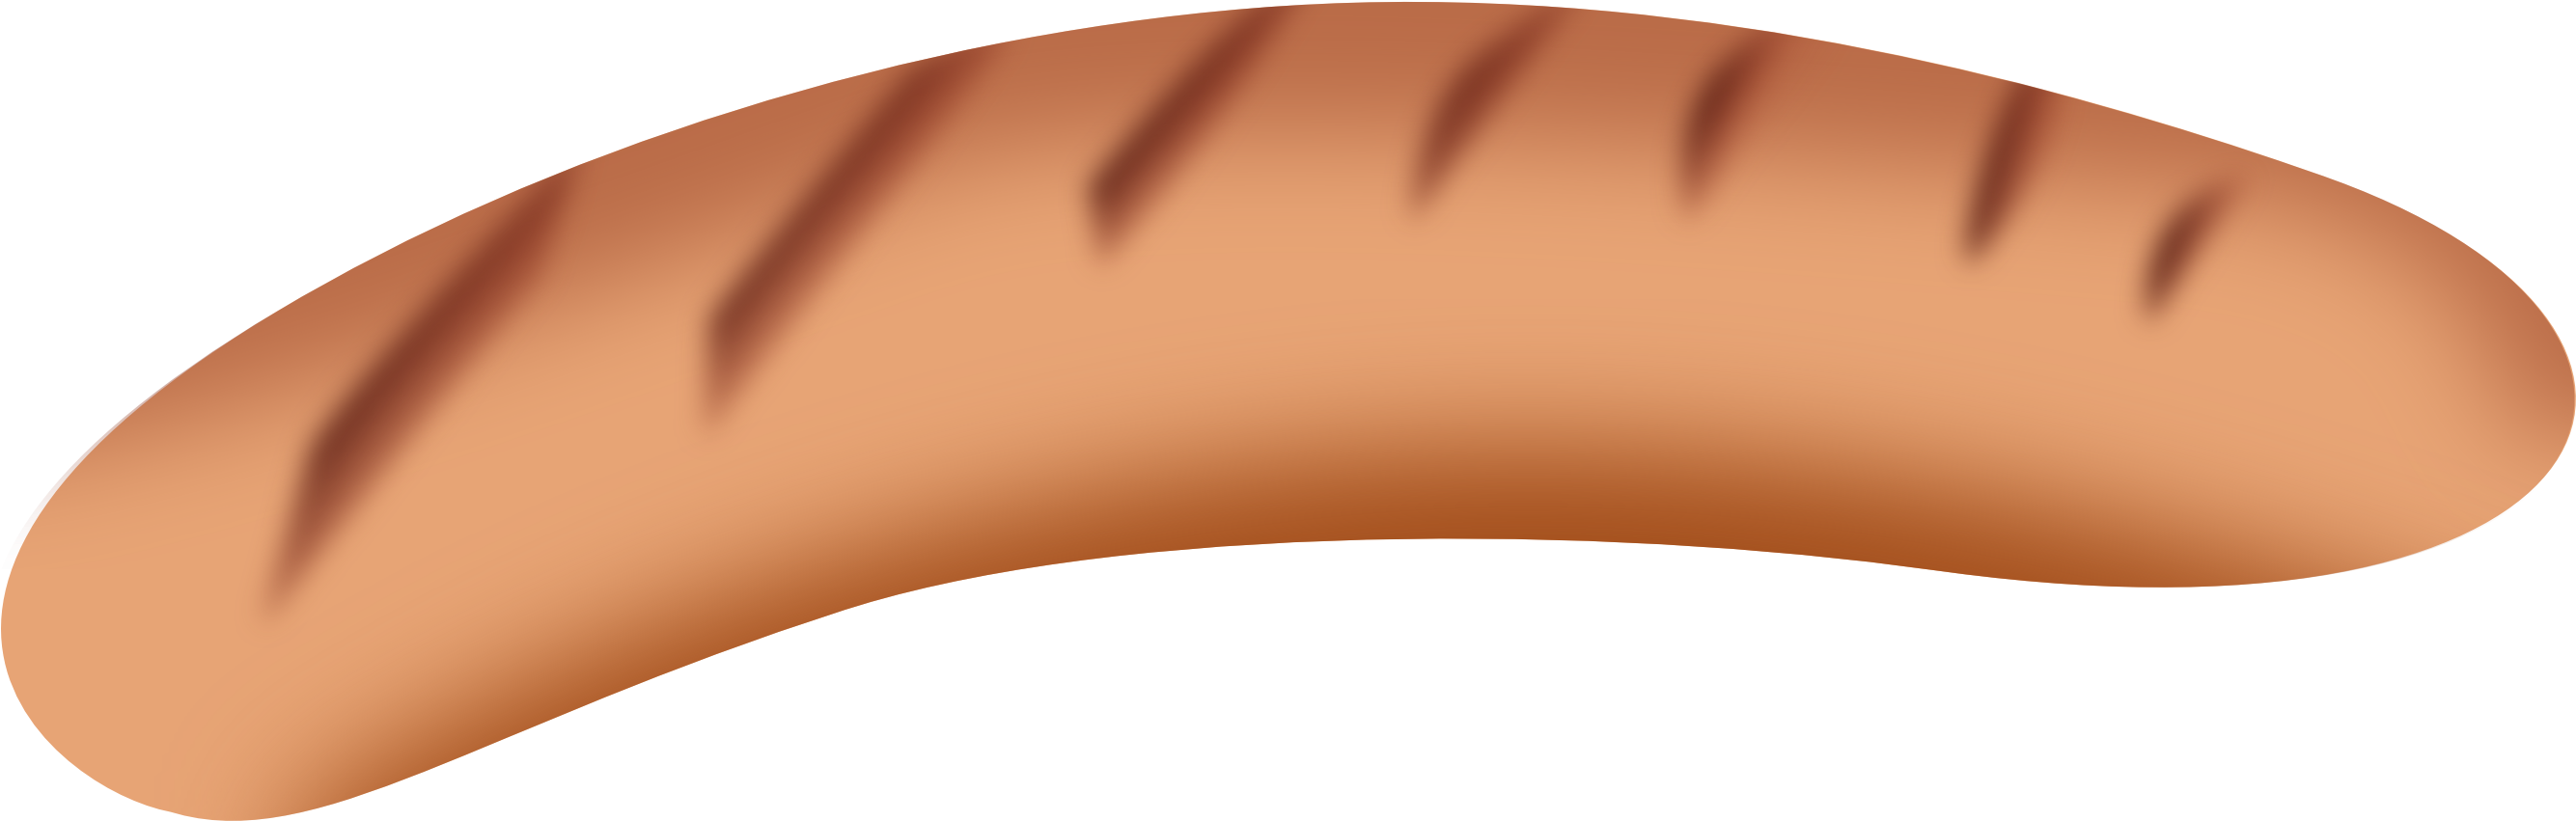 Grilled Sausage Graphic PNG